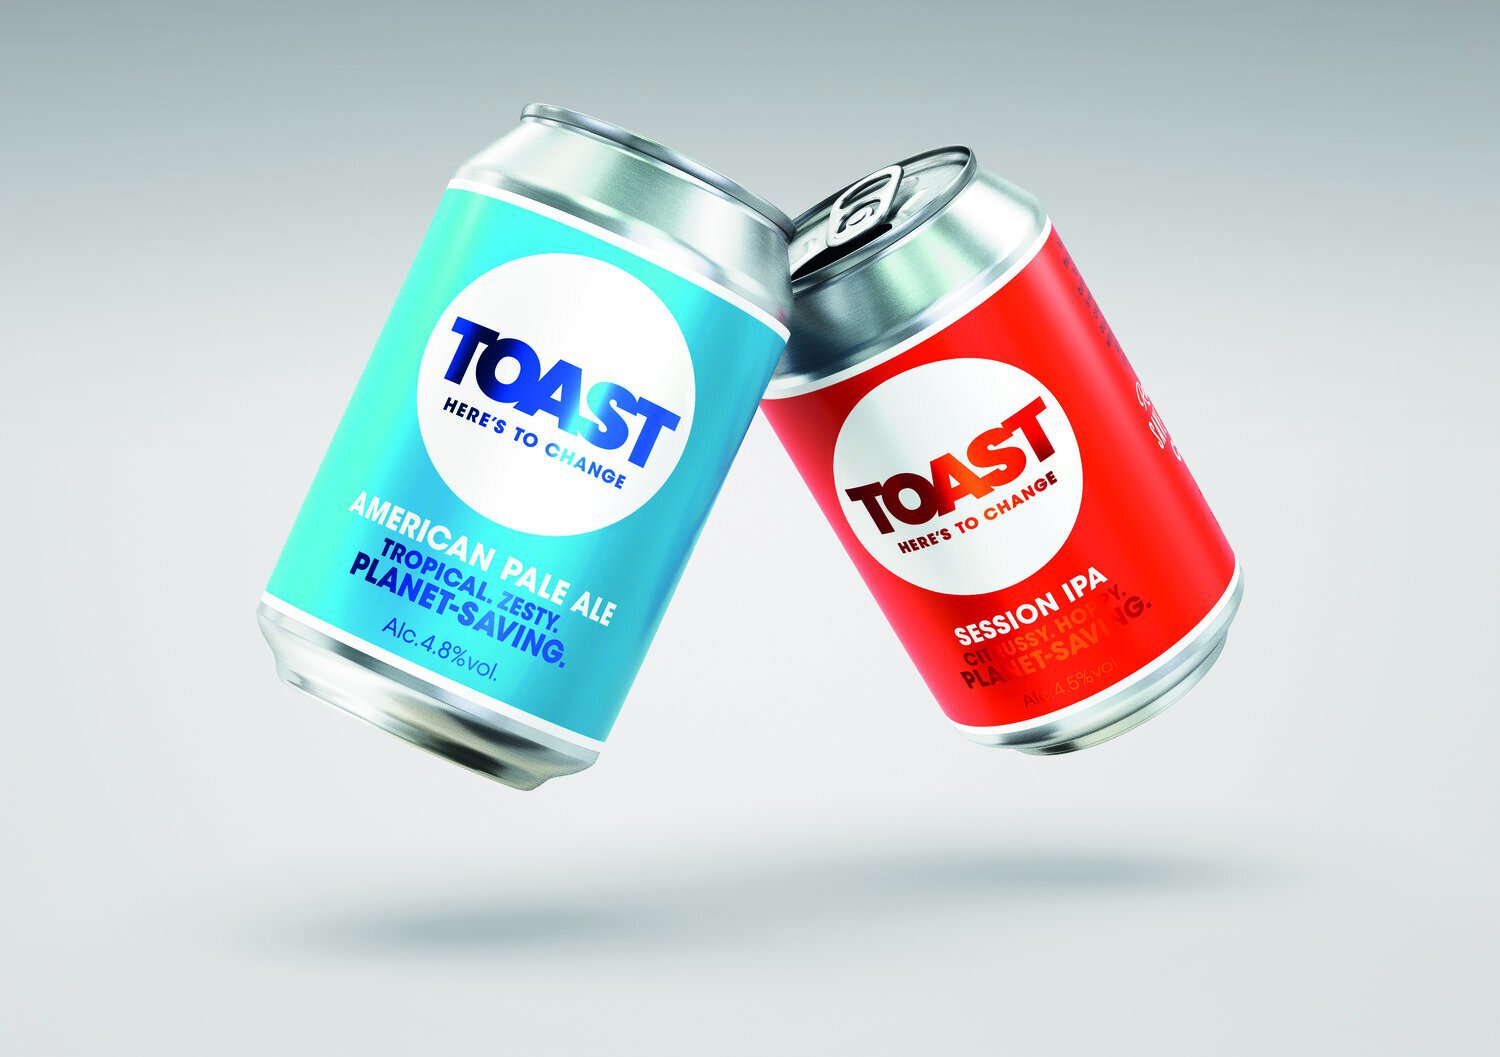 B&B Studio Elevates the Toast Ale Mission With Bold and Purposeful Rebrand